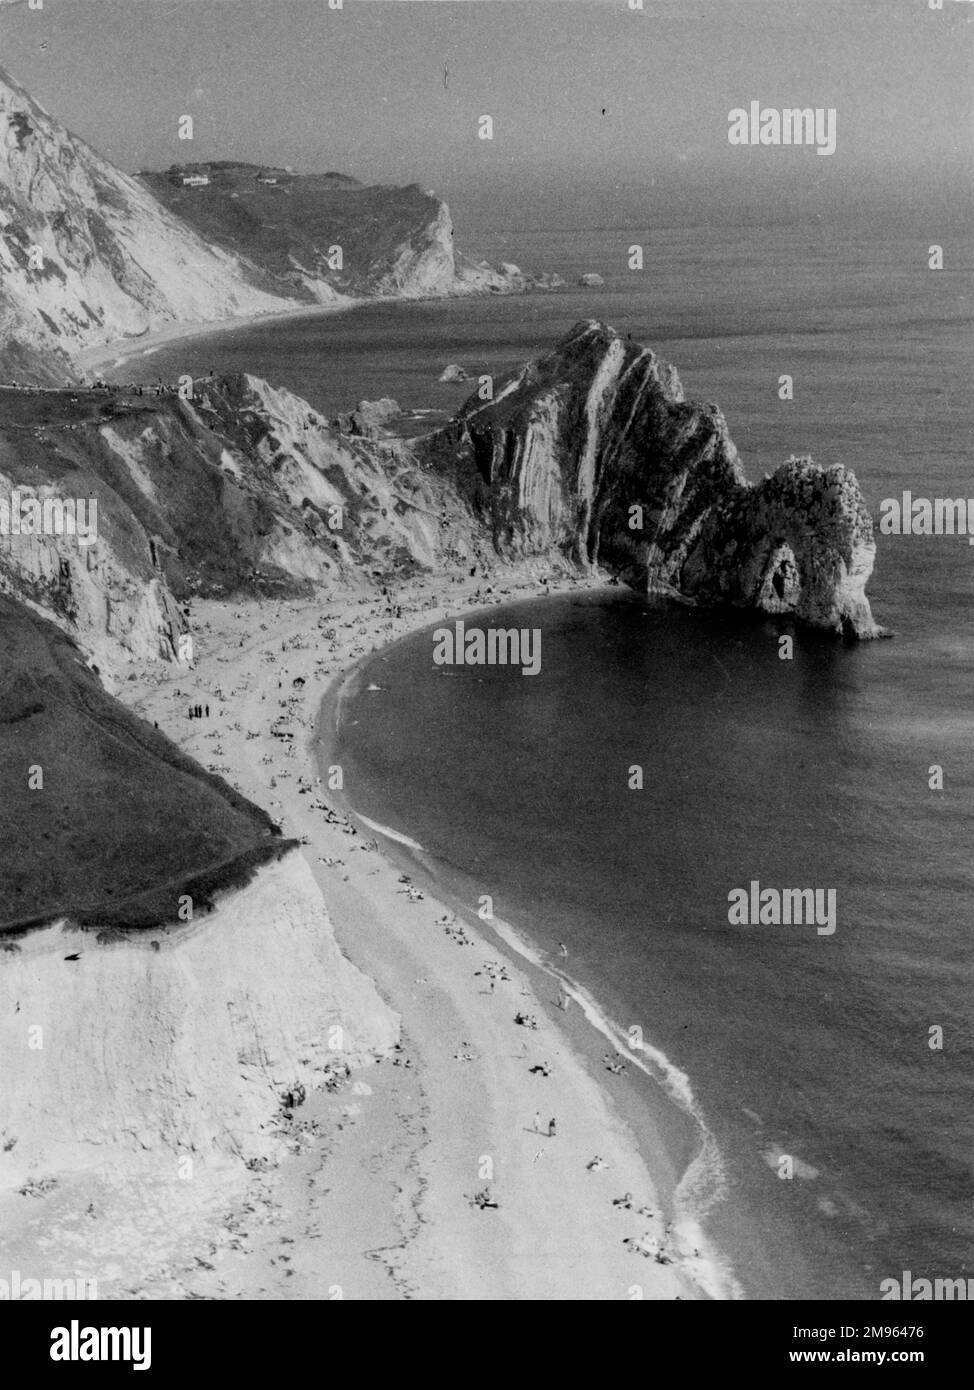 A striking impression of the Dorset (England) coastline, with its cliffs and sands, seen here at Durdle Dor, a fine cliff formation, with an arched rock. Stock Photo